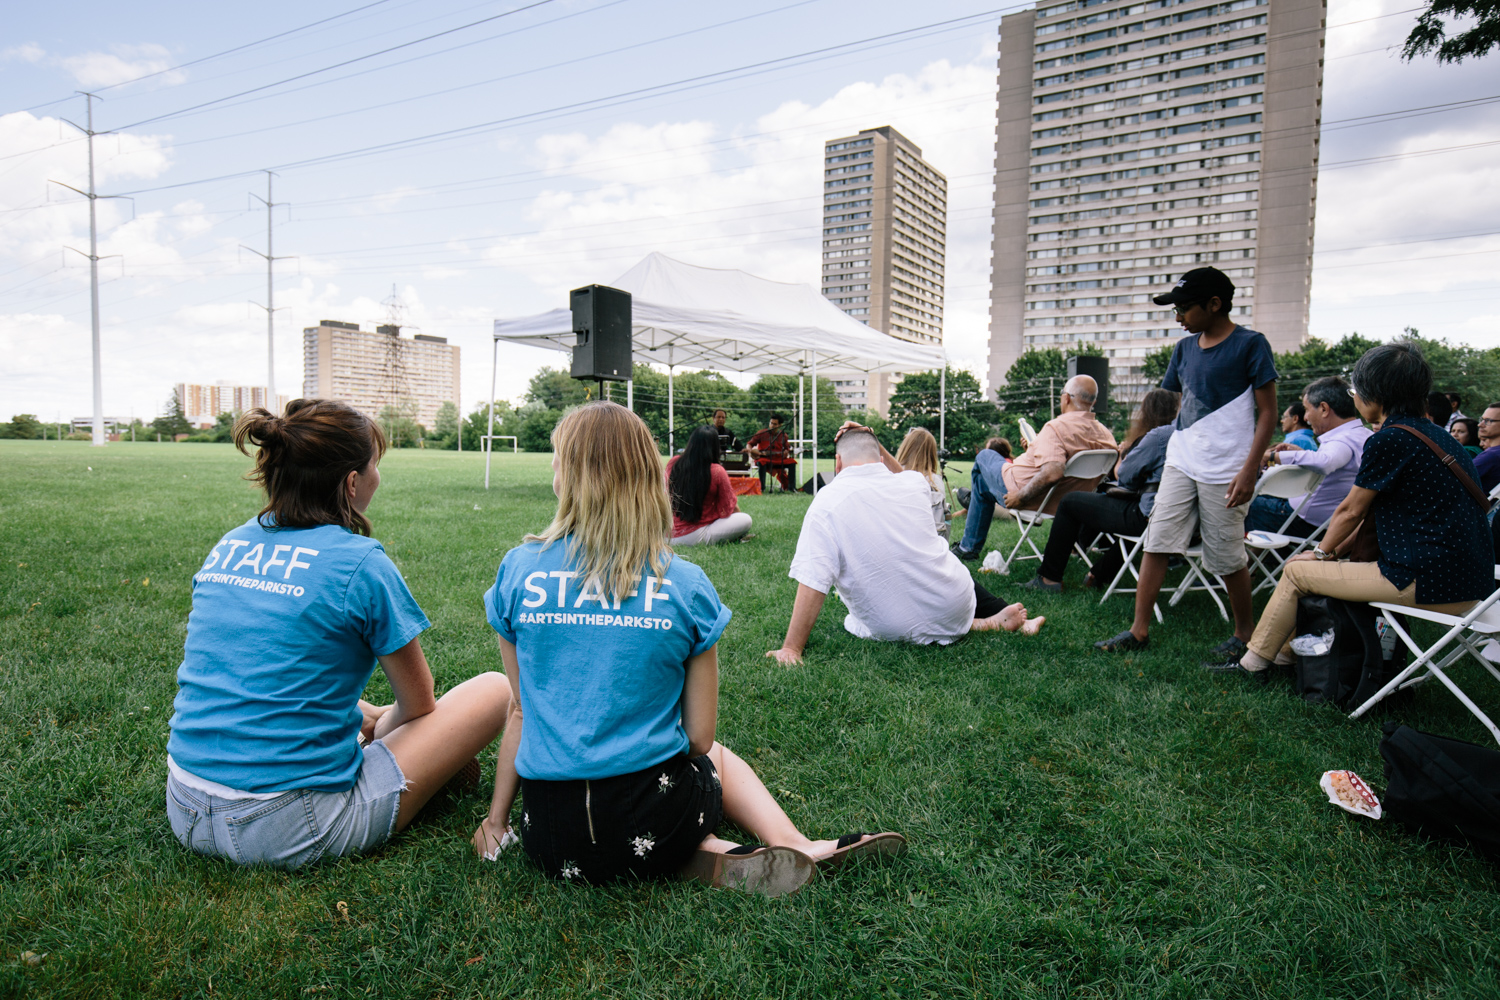 Audience members sit on the grass and in chairs. Two Arts in the Parks staff sit in the foreground wearing blue shirts.